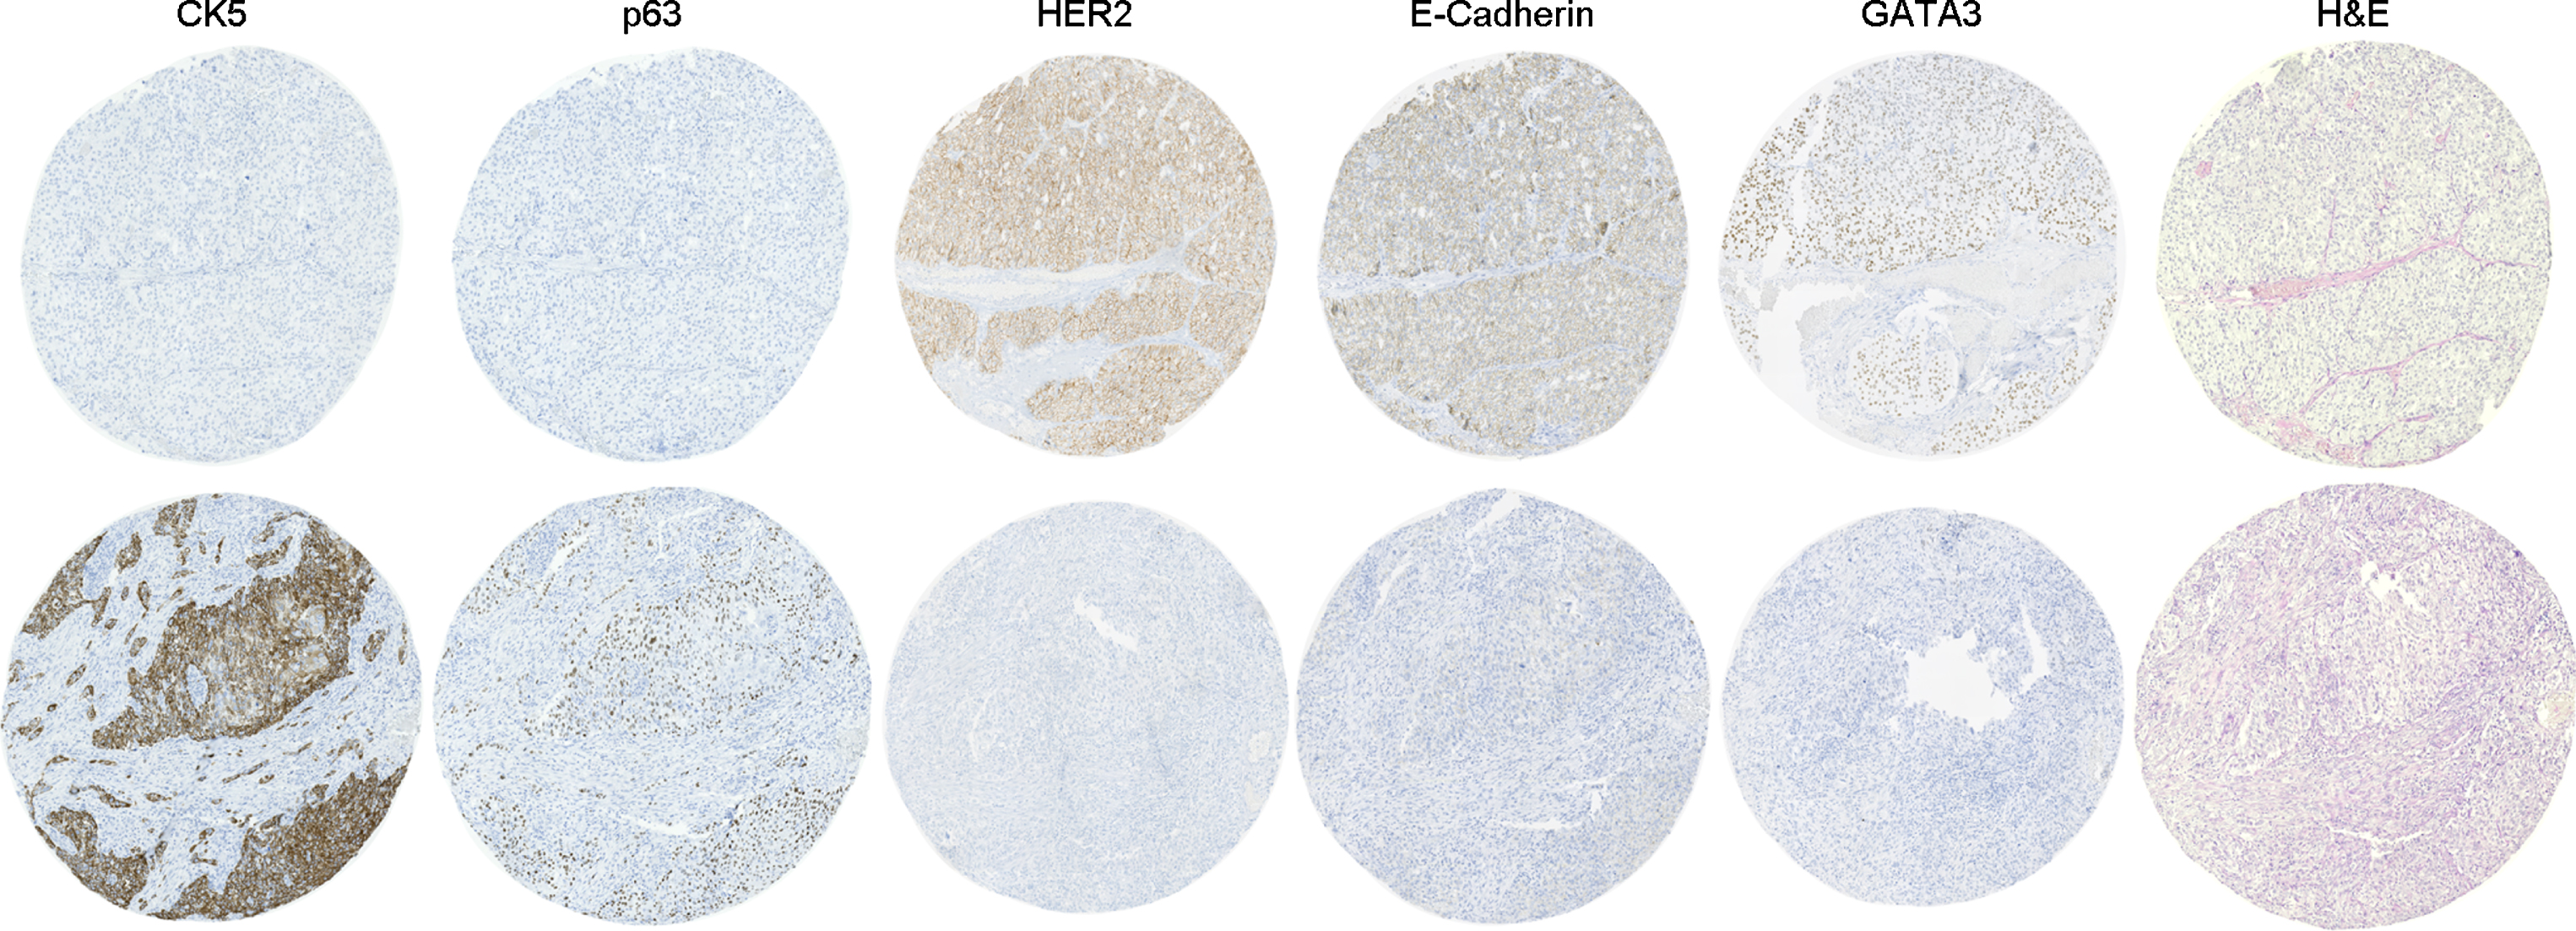 Representative images of routine hematoxylin and eosin (H&E) staining and intercore heterogeneity in five markers (CK5, E-Cadherin, GATA3, HER2 and p63) in two different cores from the same tumor.